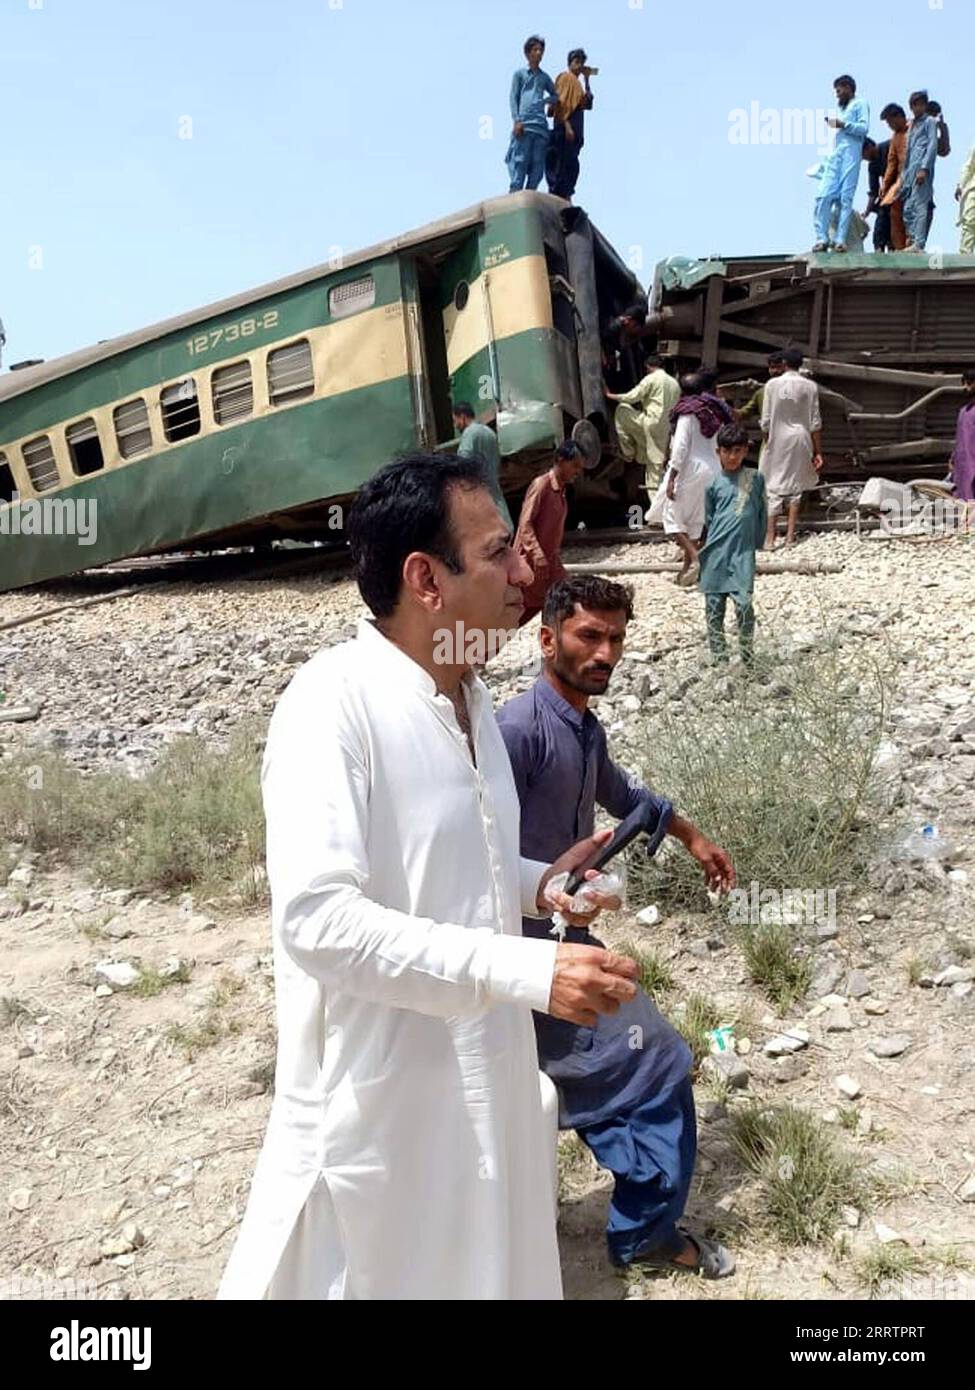 230806 -- ISLAMABAD, Aug. 6, 2023 -- This photo taken with a mobile phone shows people walking past derailed compartments of a passenger train in the Sanghar district of Pakistan s southern Sindh province on Aug. 6, 2023. At least 22 people were killed and over 50 others injured on Sunday after a passenger train derailed in the Sanghar district of Pakistan s southern Sindh province, local police said. Str/Xinhua PAKISTAN-SINDH-TRAIN-ACCIDENT AhmadxKamal PUBLICATIONxNOTxINxCHN Stock Photo